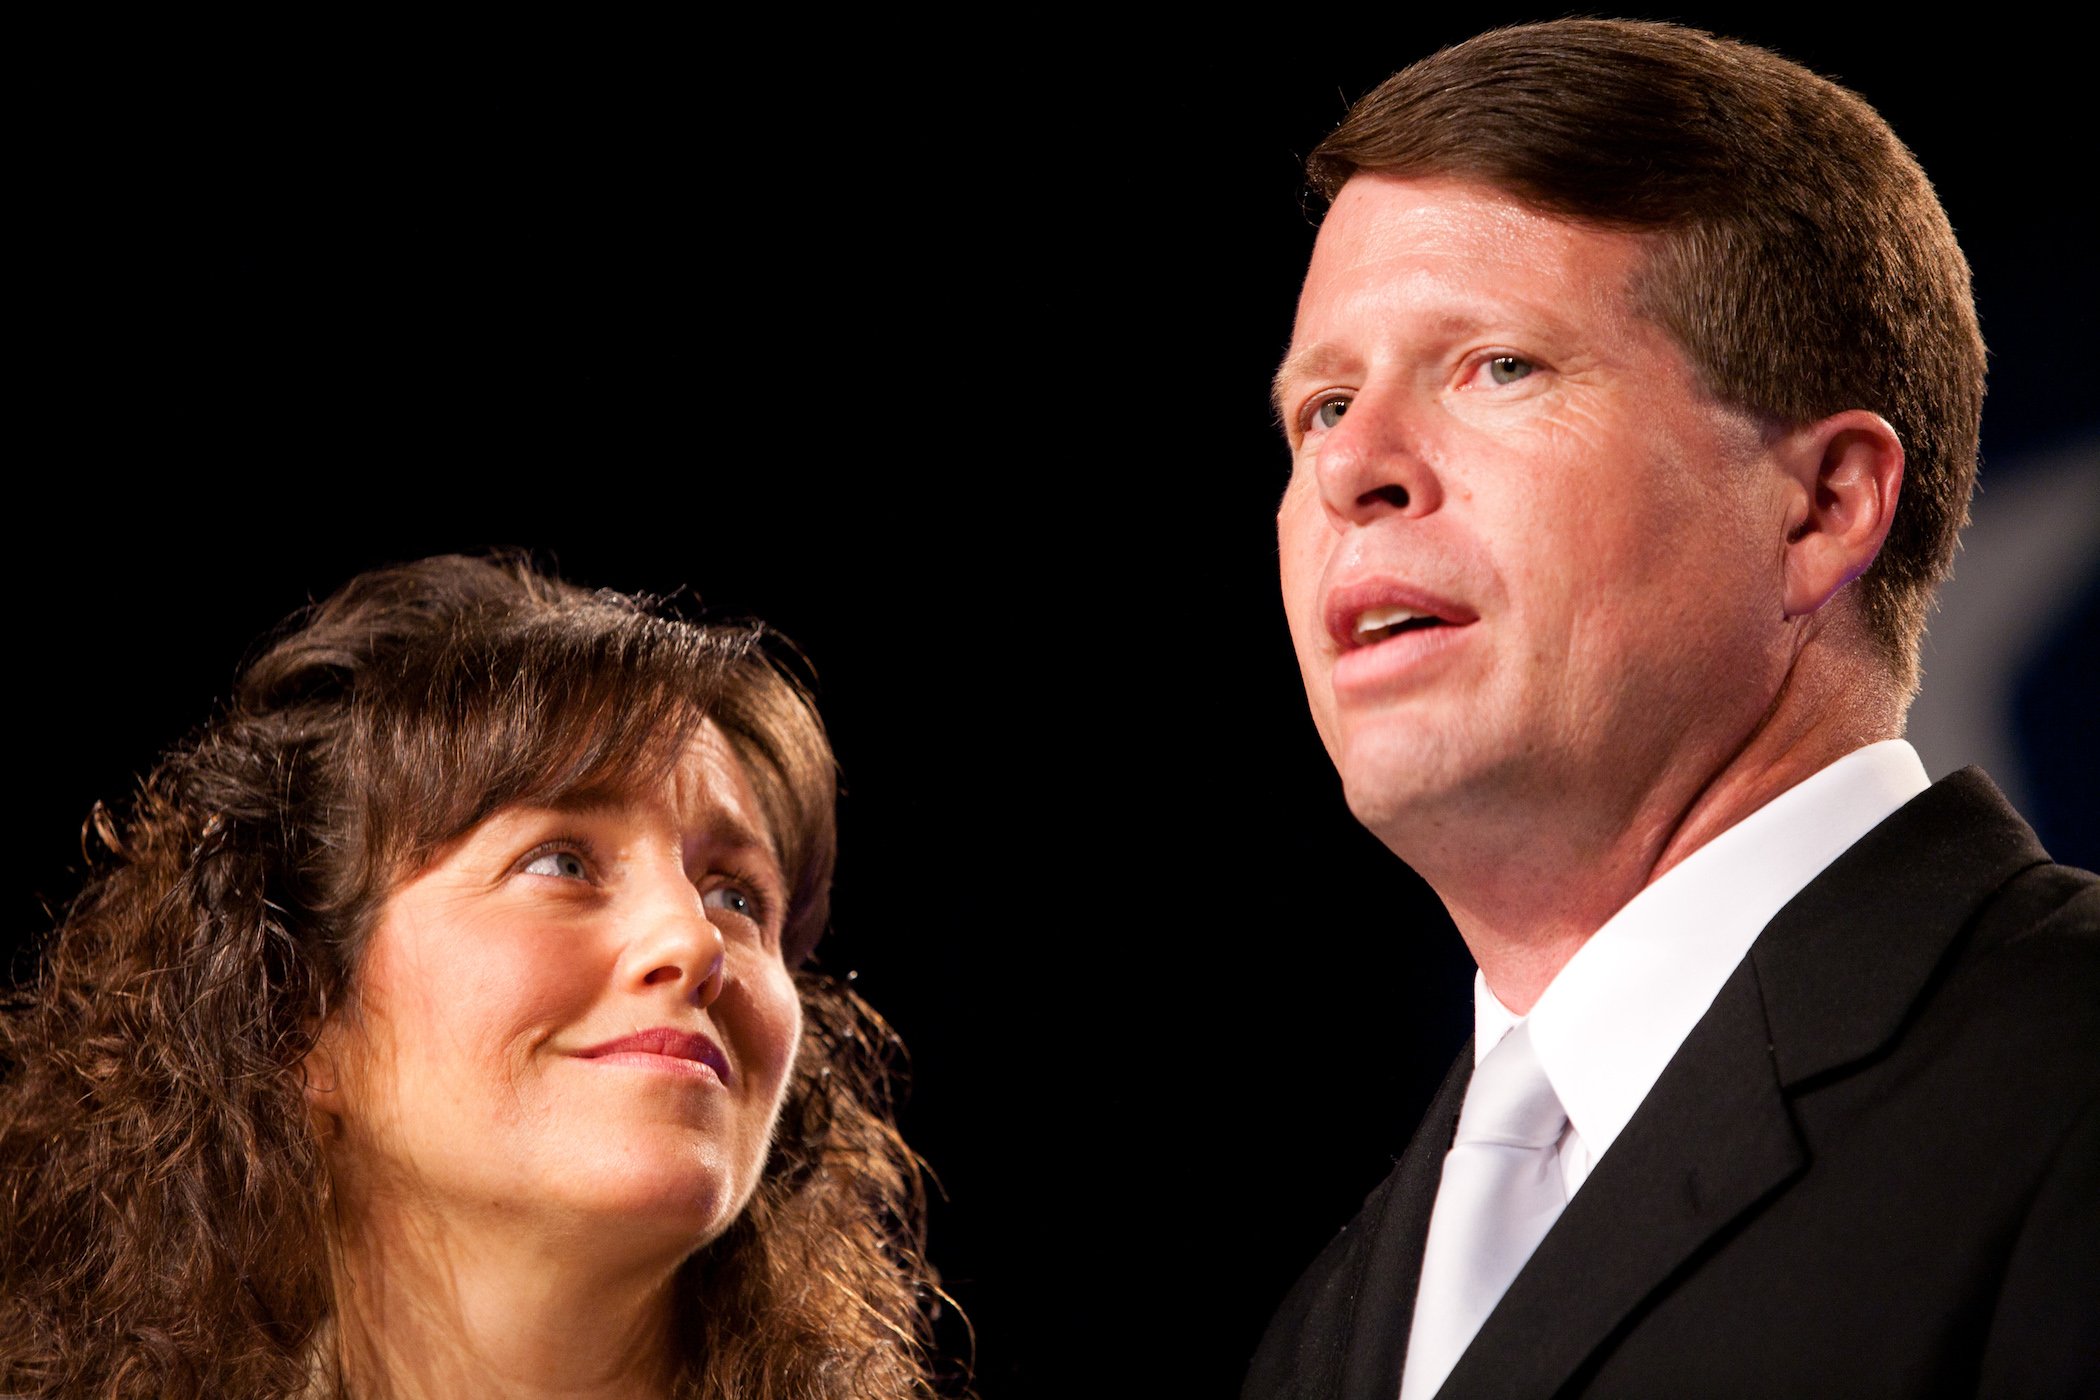 Michelle Duggar of the Duggar family from TLC's 'Counting On' looking up at Jim Bob Duggar against a black background